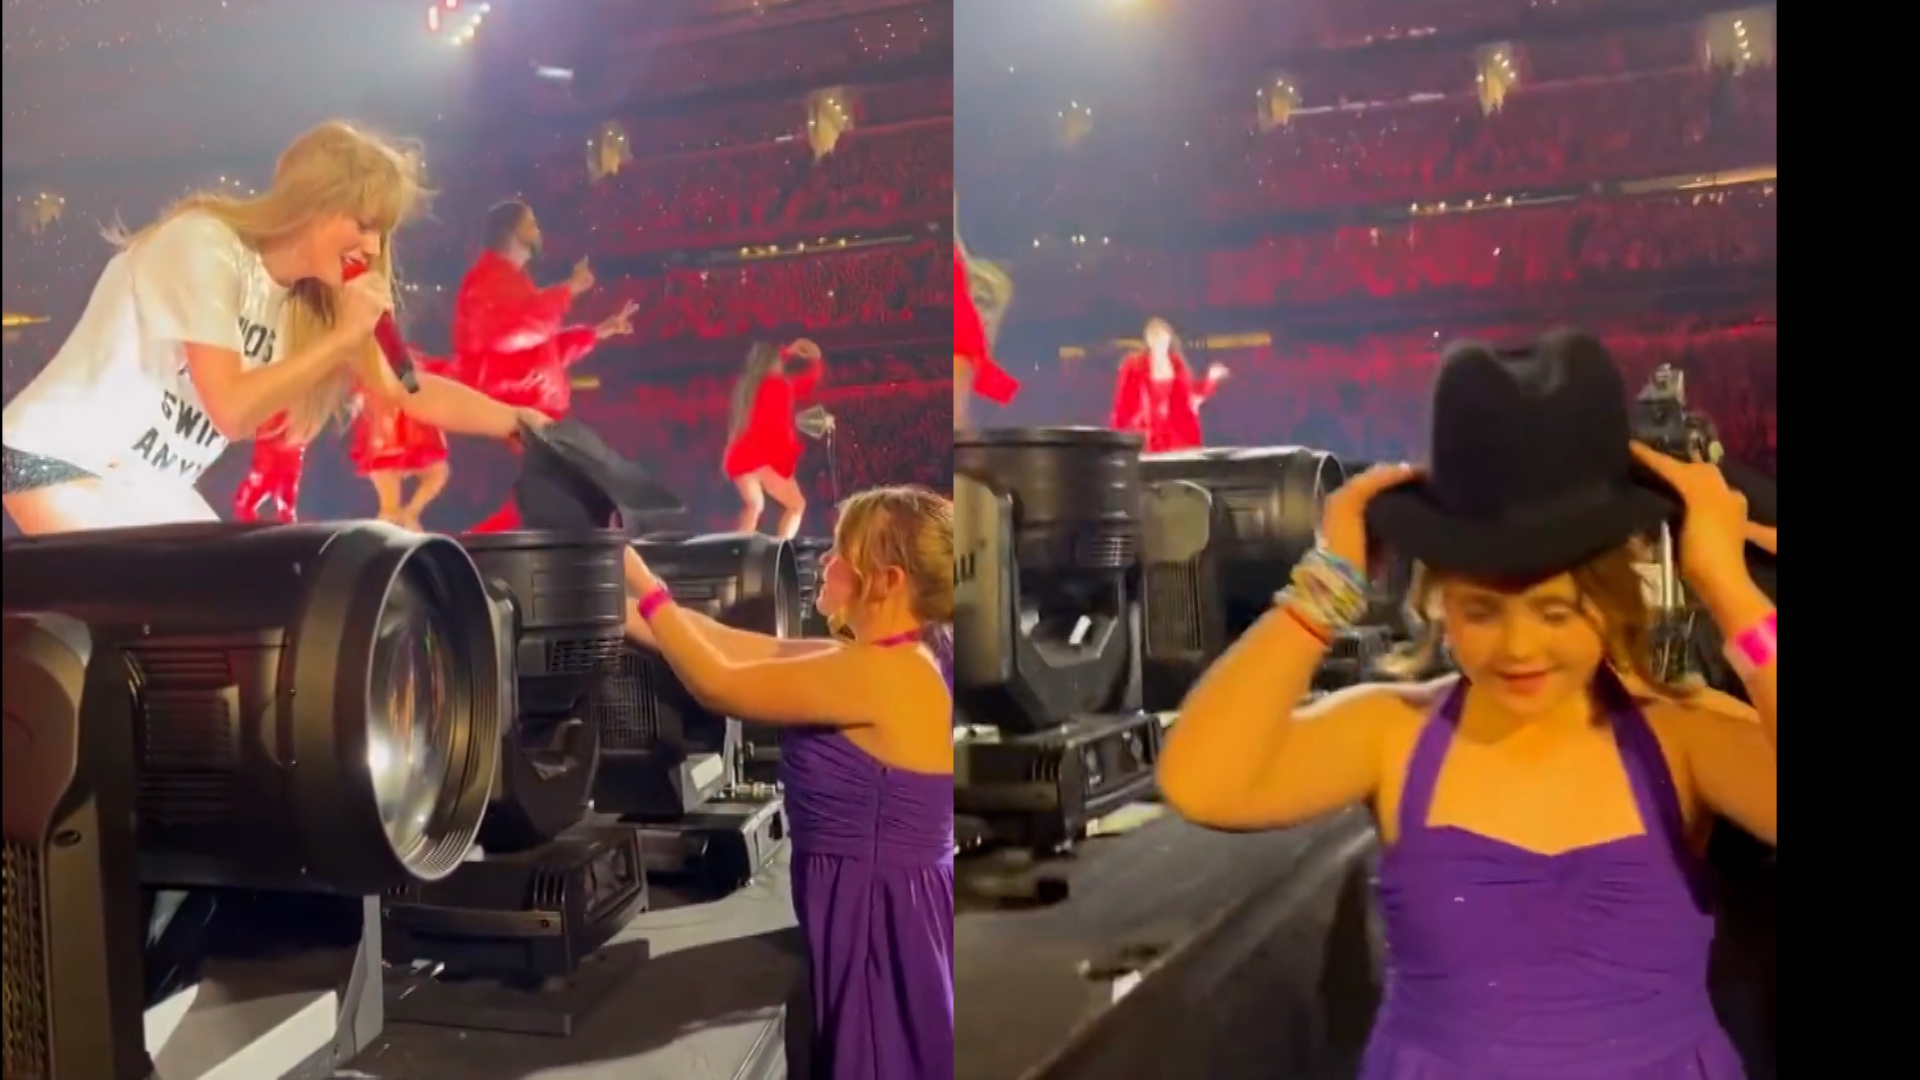 Taylor Swift shares beautiful moment with Selena Gomez's little sister during concert